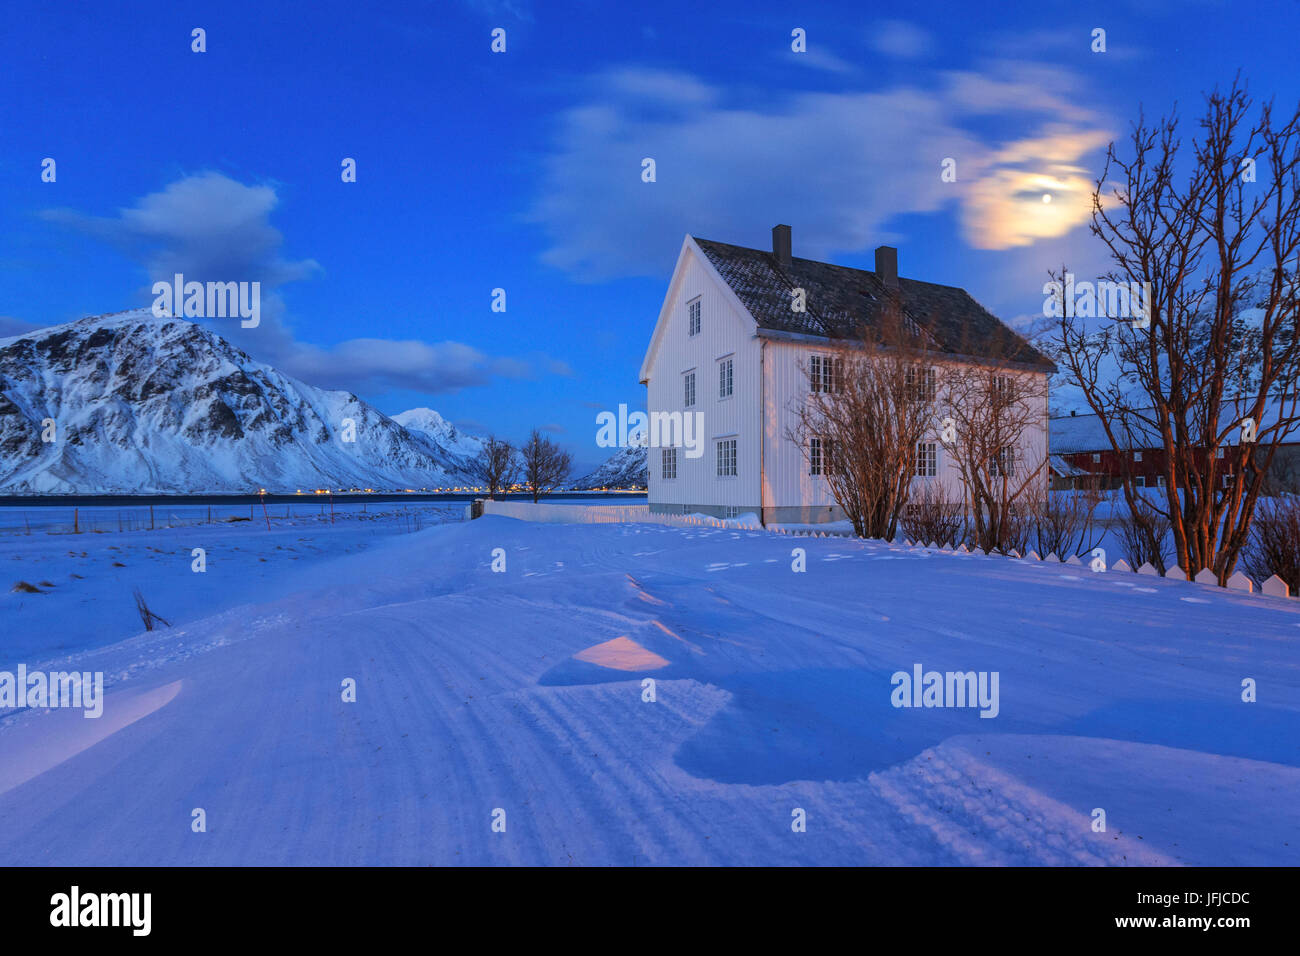 Typical house surrounded by snow in a cold winter day at dusk, Flakstad Lofoten Islands Norway Europe Stock Photo